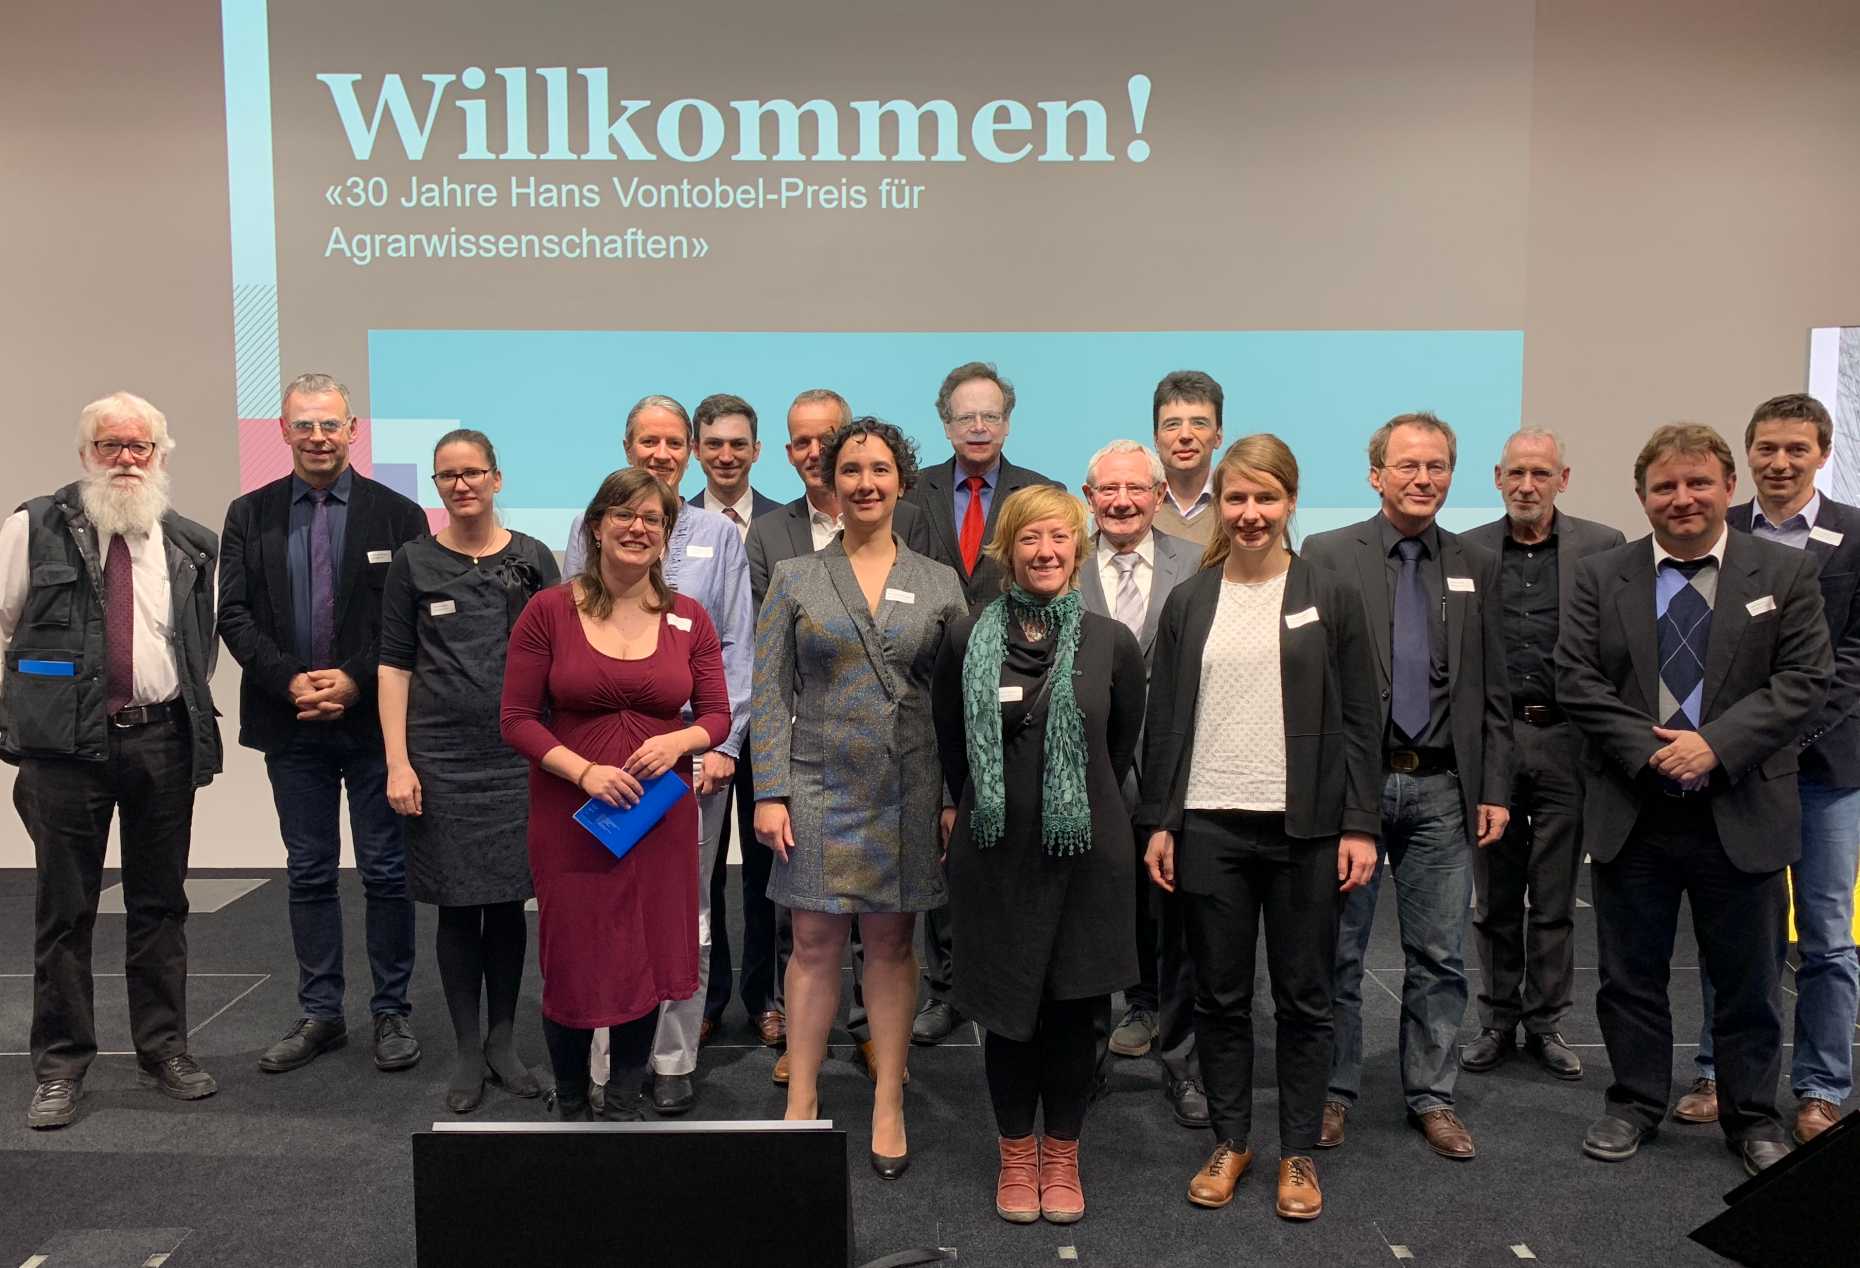 Winners attending this year’s Hans Vontobel Award ceremony, together with Lieni Dürst (far left), a regular attendee, who previously joined Dr H. Vontobel for the award ceremony representing the Institute of Agricultural Sciences. 